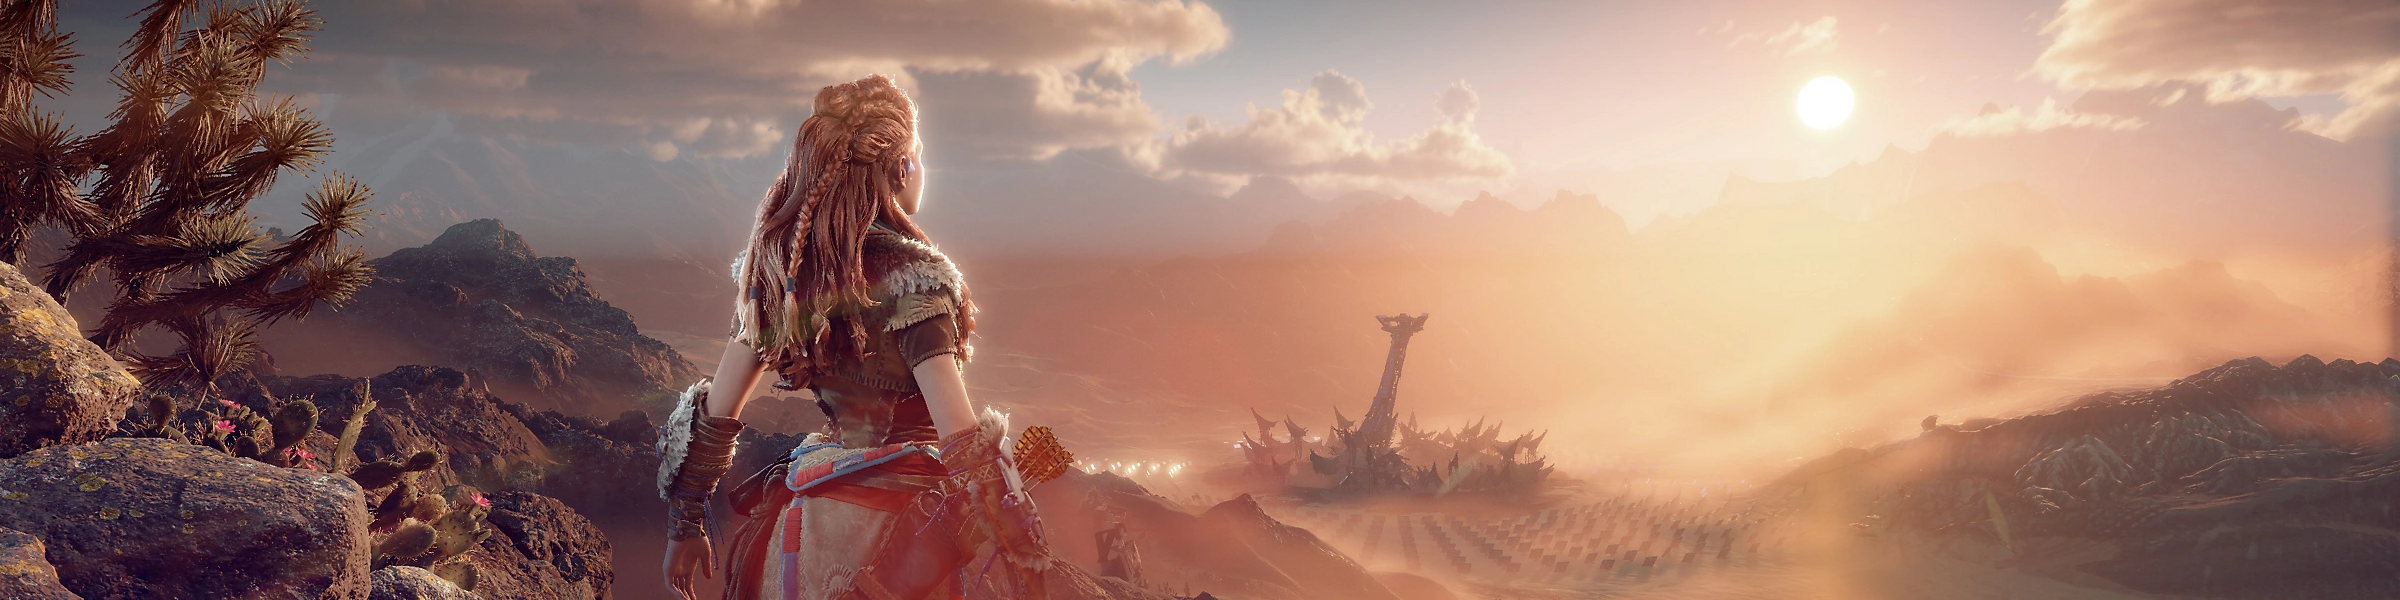 A screenshot of Horizon Forbidden West: Aloy looks over a stunning desert valley with a solar power plant and sunset in the distance.